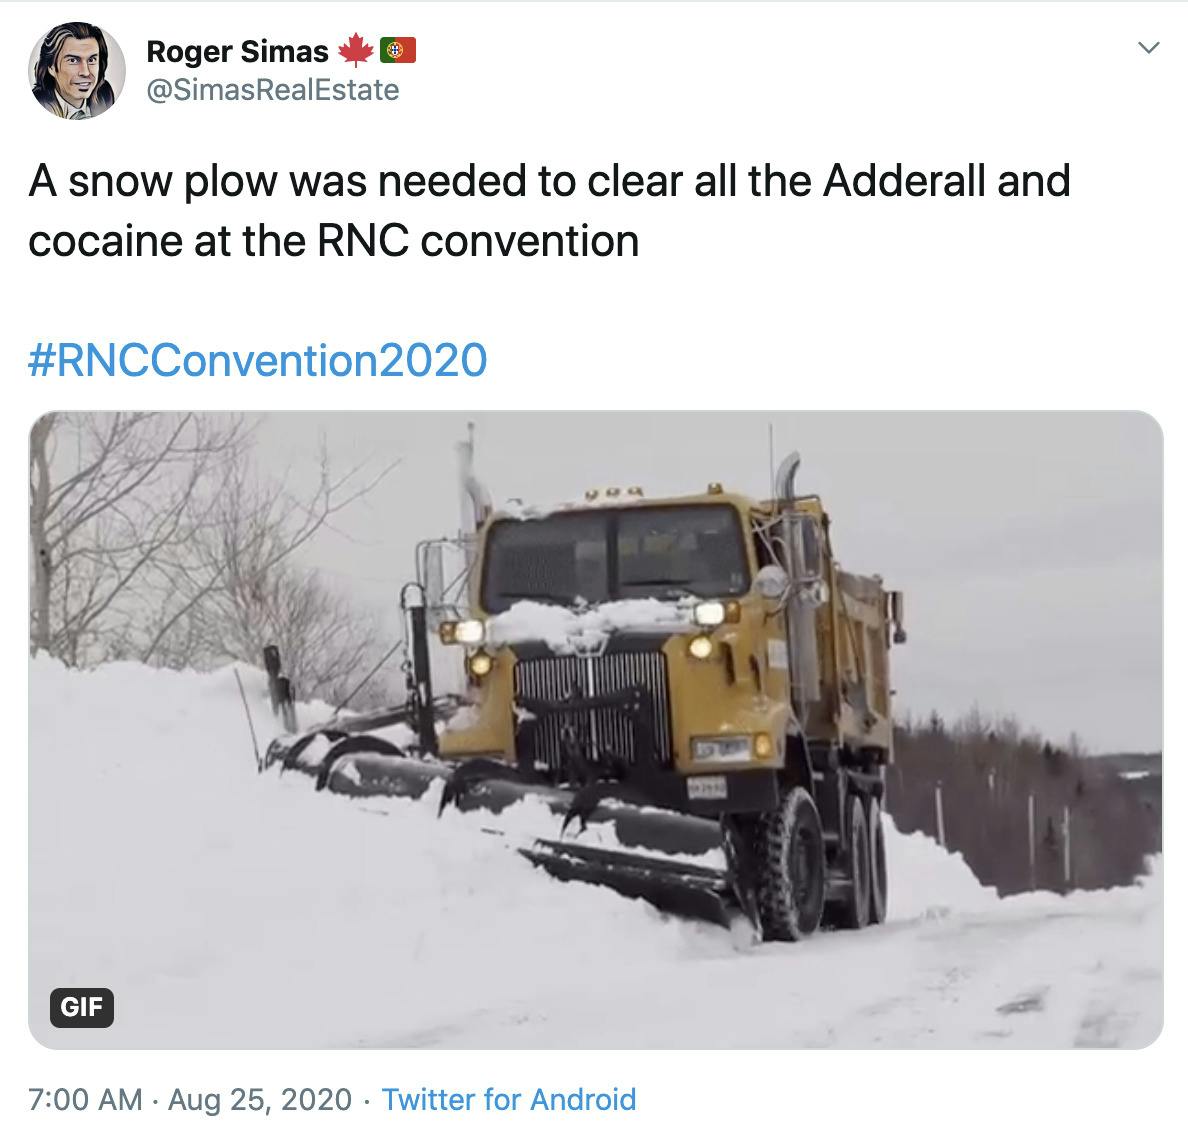 "A snow plow was needed to clear all the Adderall and cocaine at the RNC convention  #RNCConvention2020" image of a snowplow clearing the streets